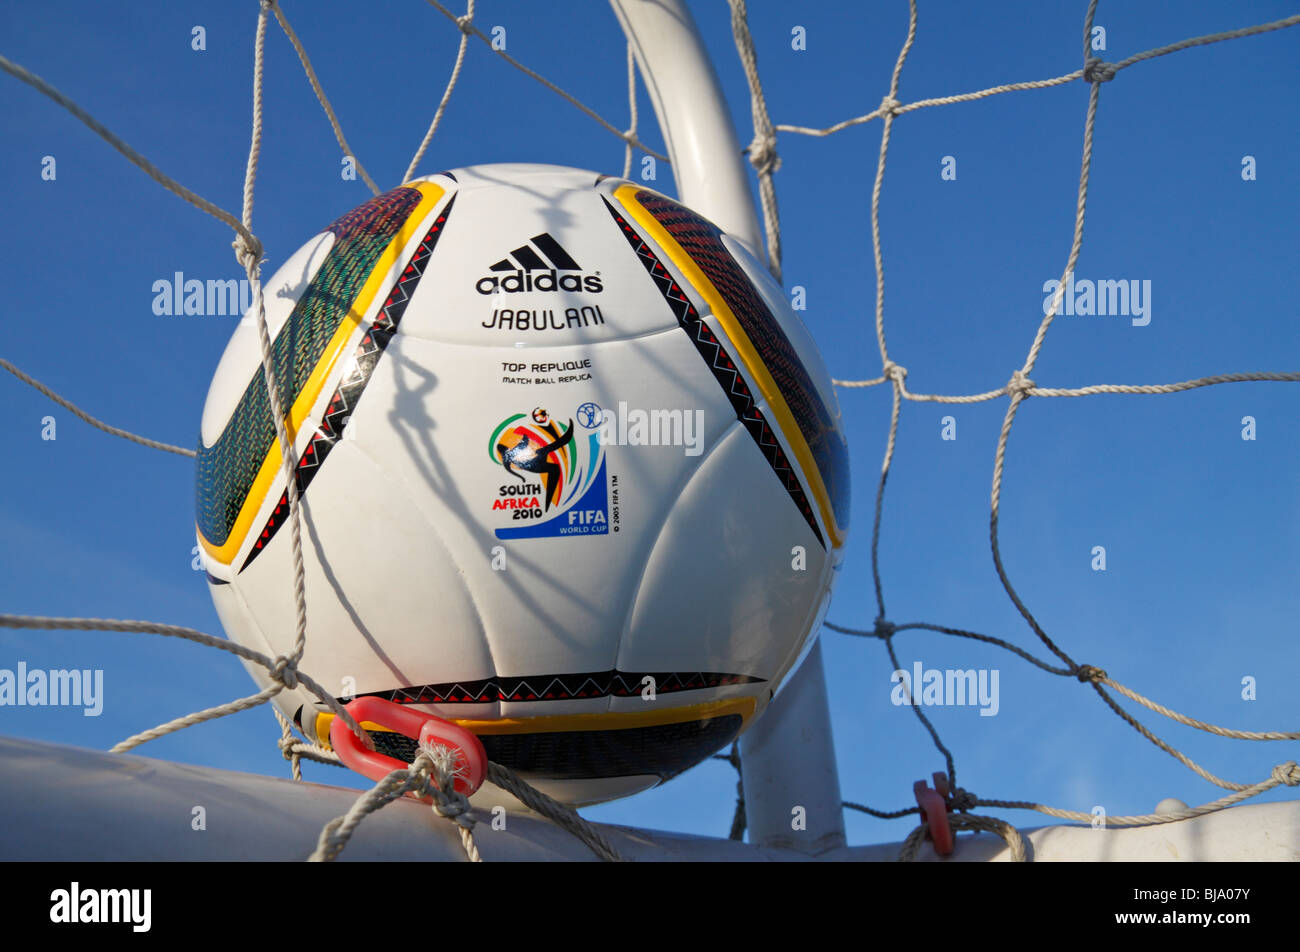 The FIFA 2010 World Cup replica match ball by Adidas, the Jabulani, in the  corner of a football net Stock Photo - Alamy